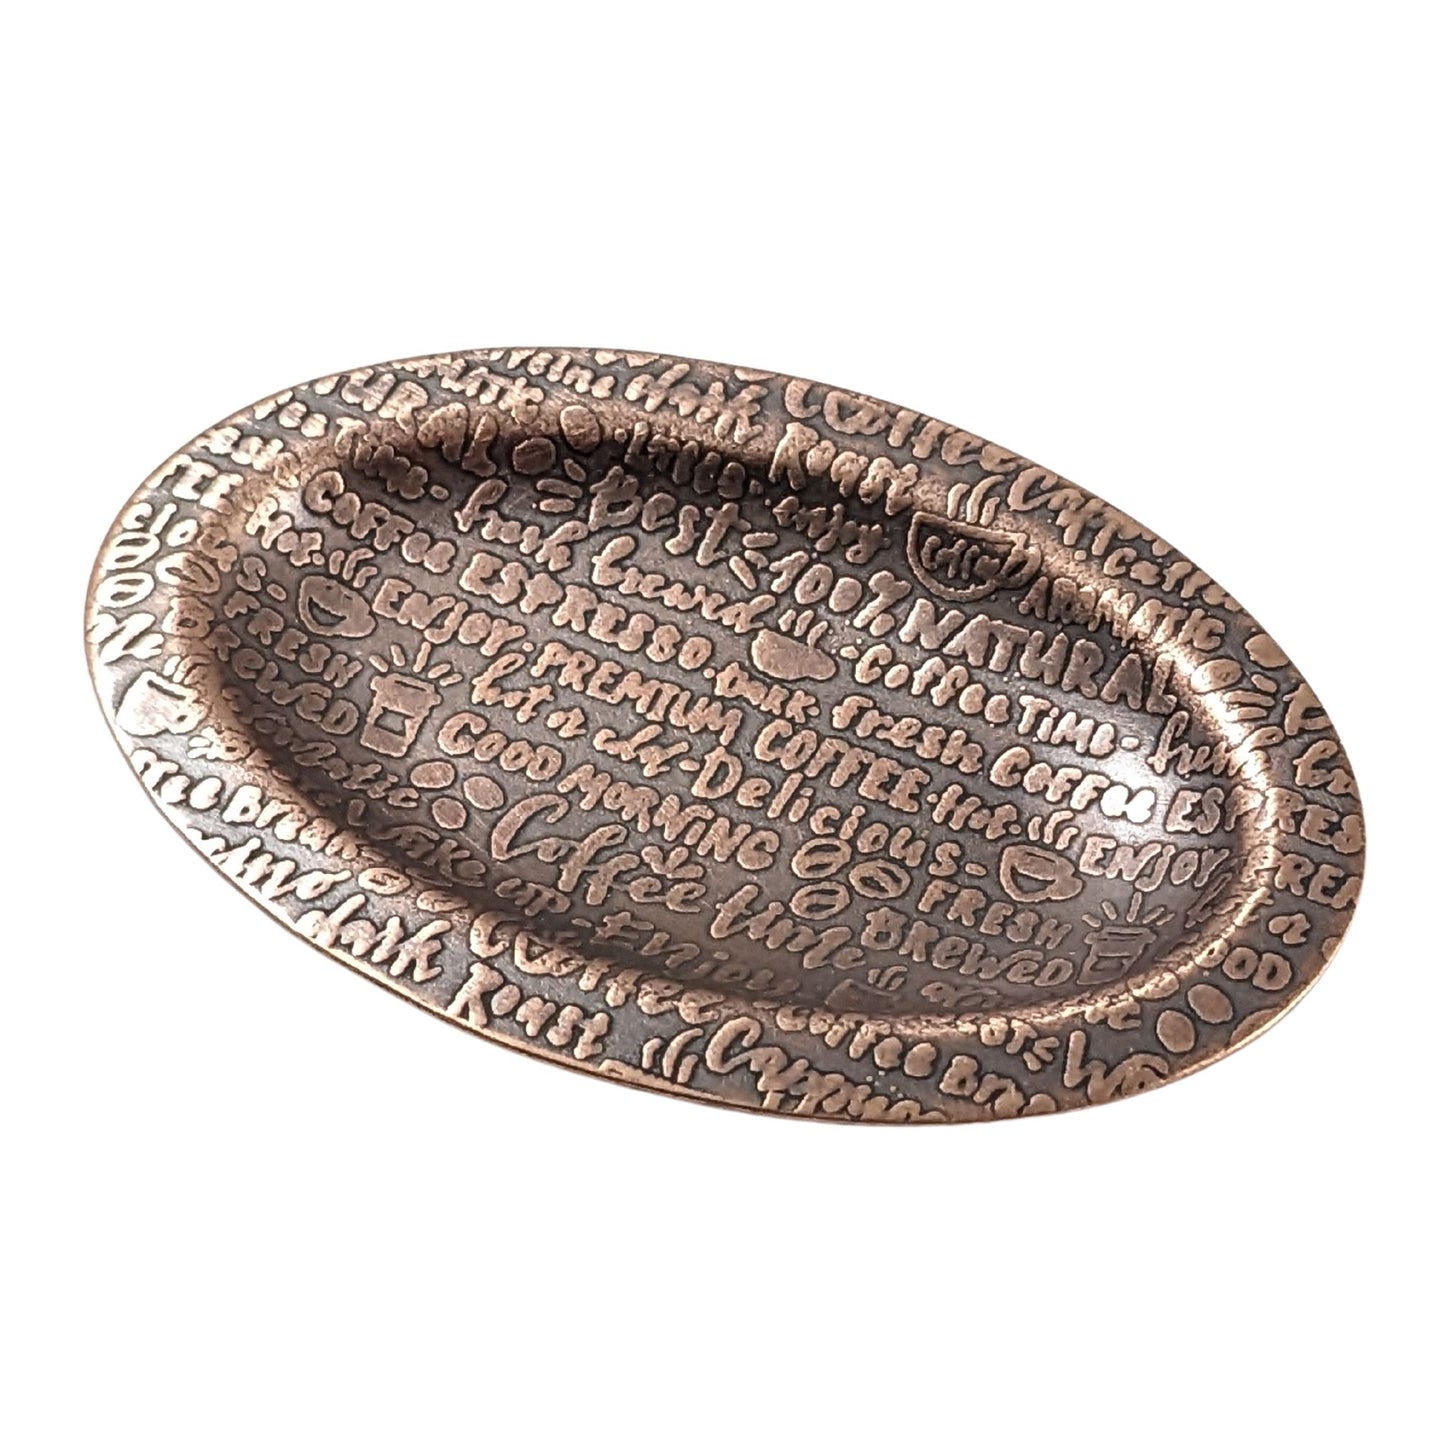 An oval copper ring dish with a raised edge. The dish has an impressed words that describe coffee like premium, good morning, wake up, fresh brewed, expresso, and more.